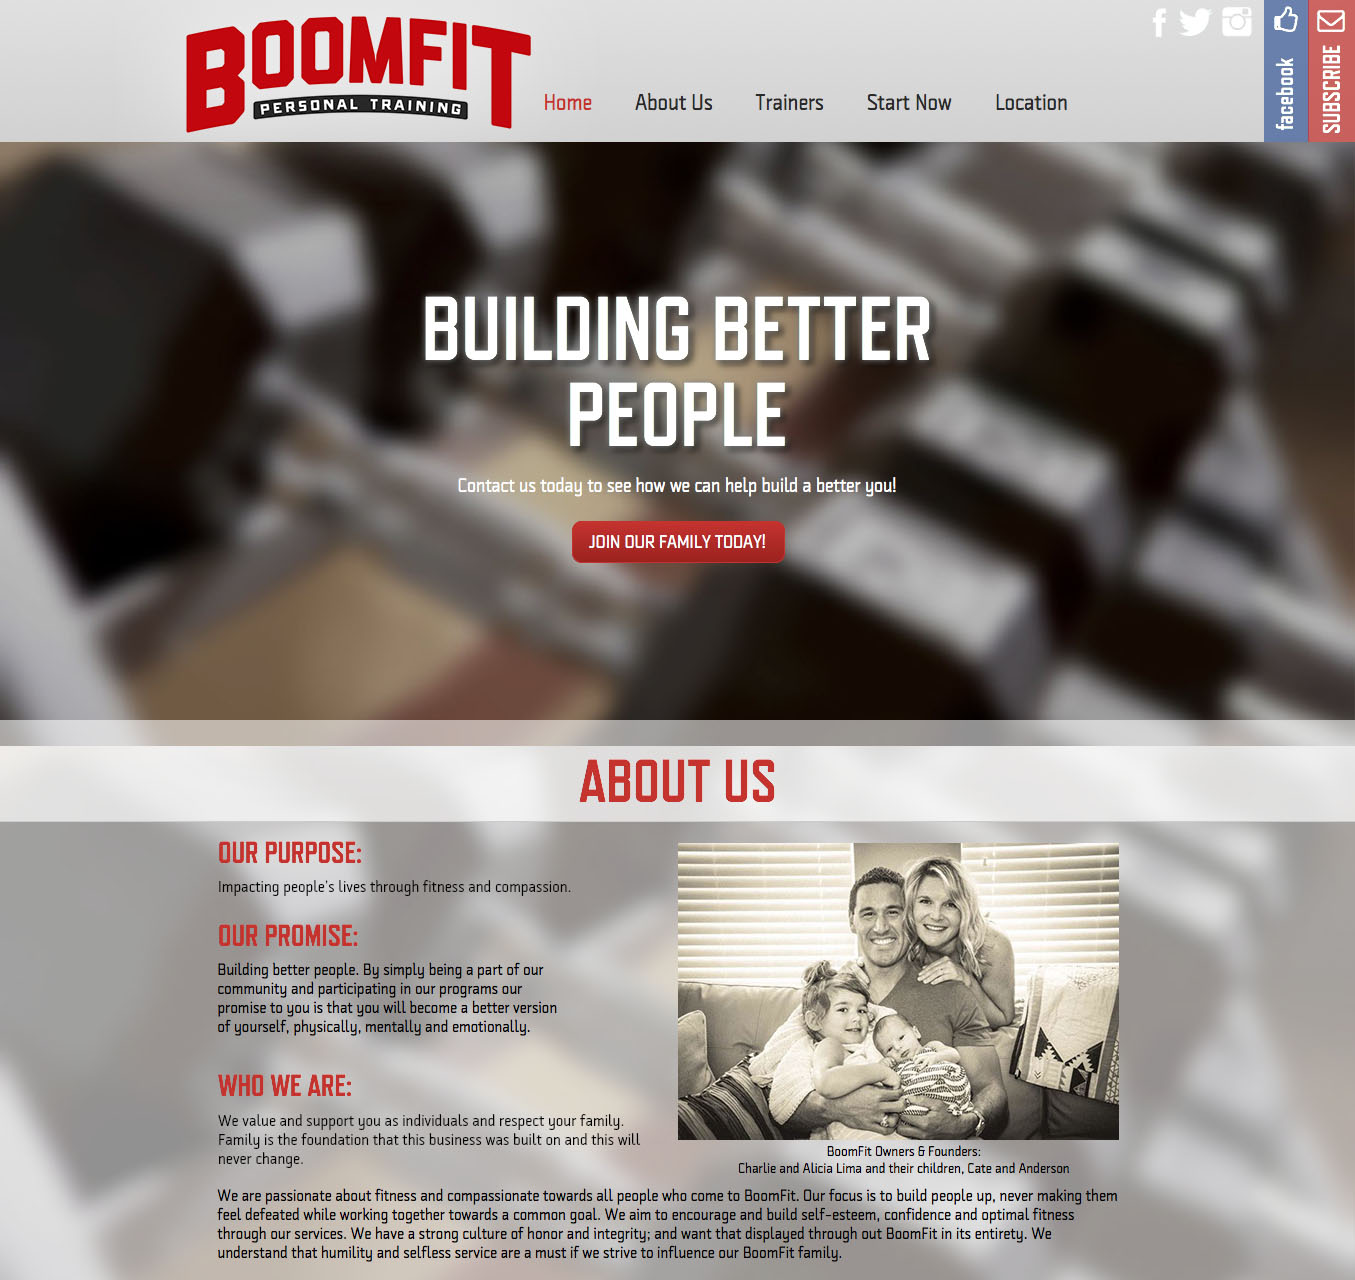 BoomFit Personal Training